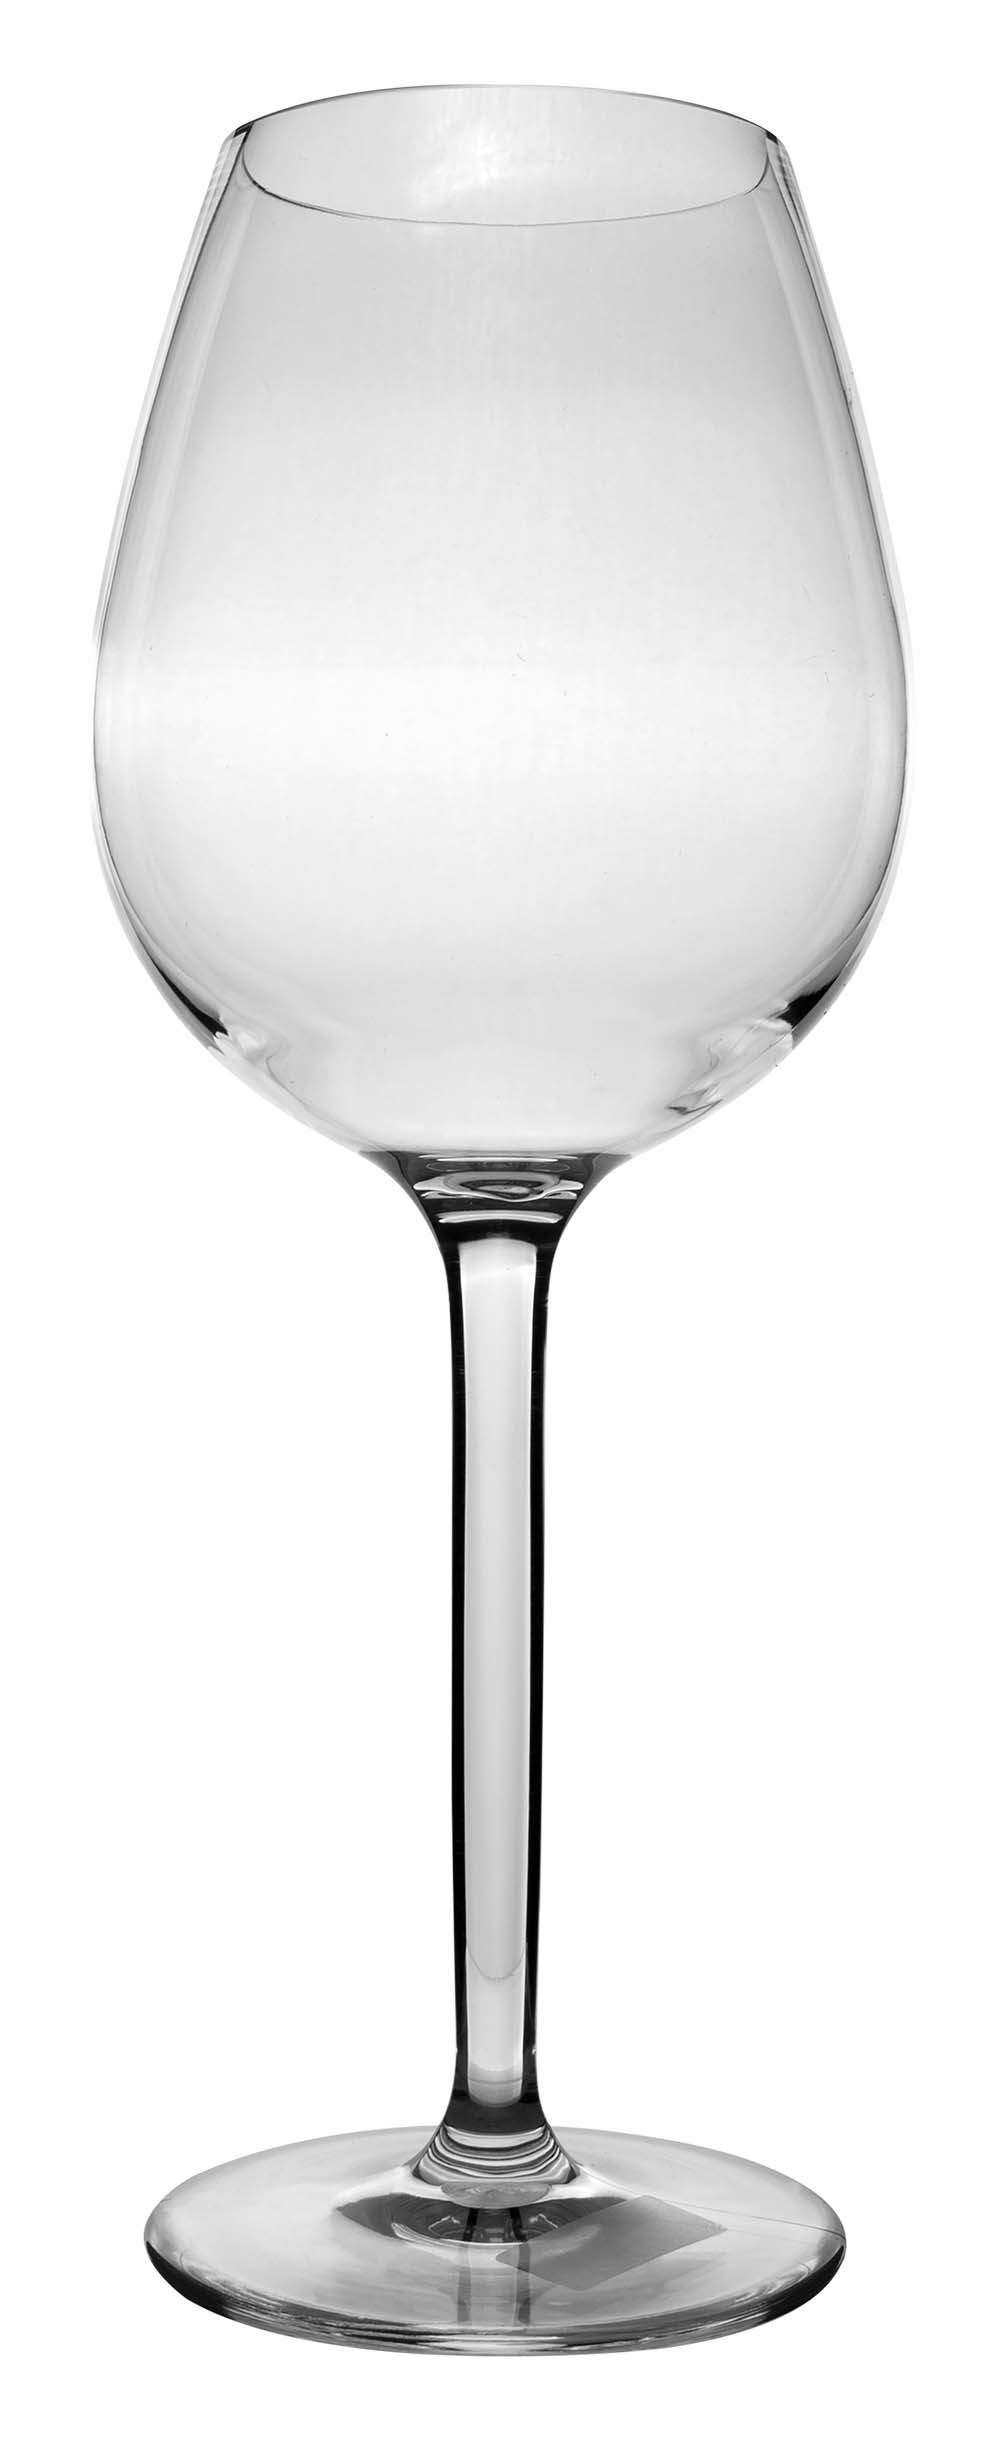 6101465 An extra sturdy and luxurious set of red wine glasses. Made of 100% tritan. This makes the glasses almost unbreakable, light weight and scratch proof. This glass is also dishwasher safe. The glass is BPA free.